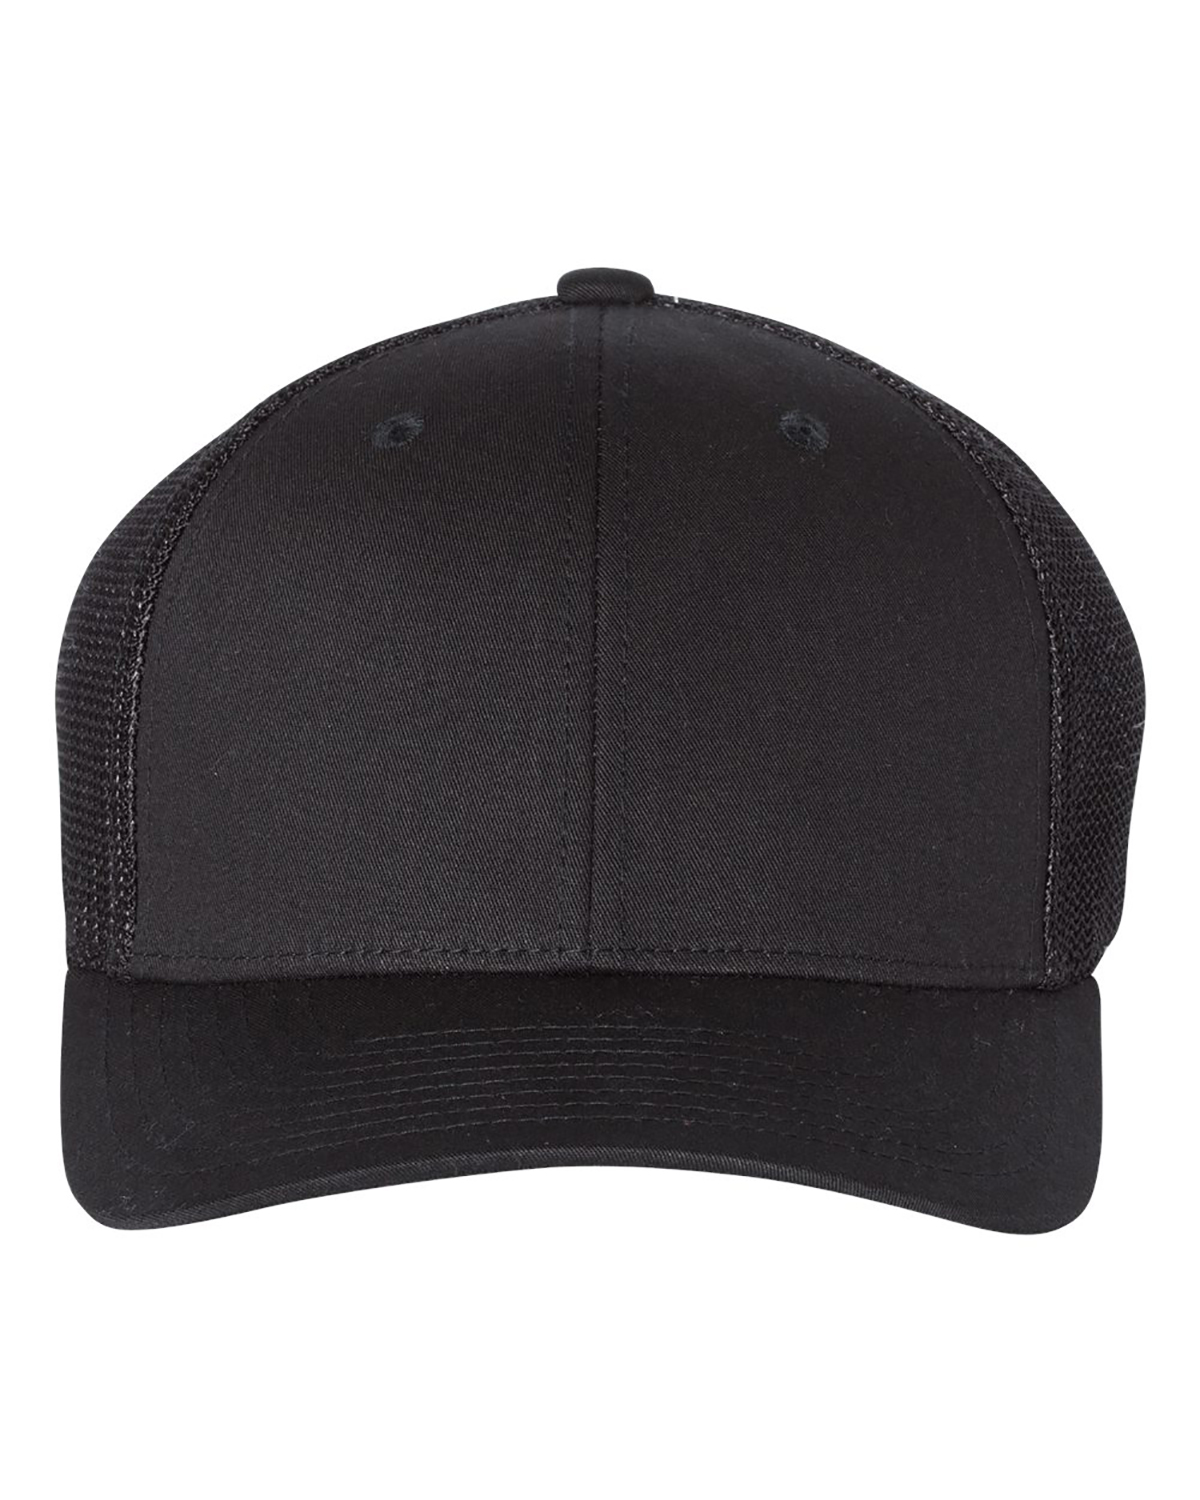 Richardson 110 Fitted Trucker with